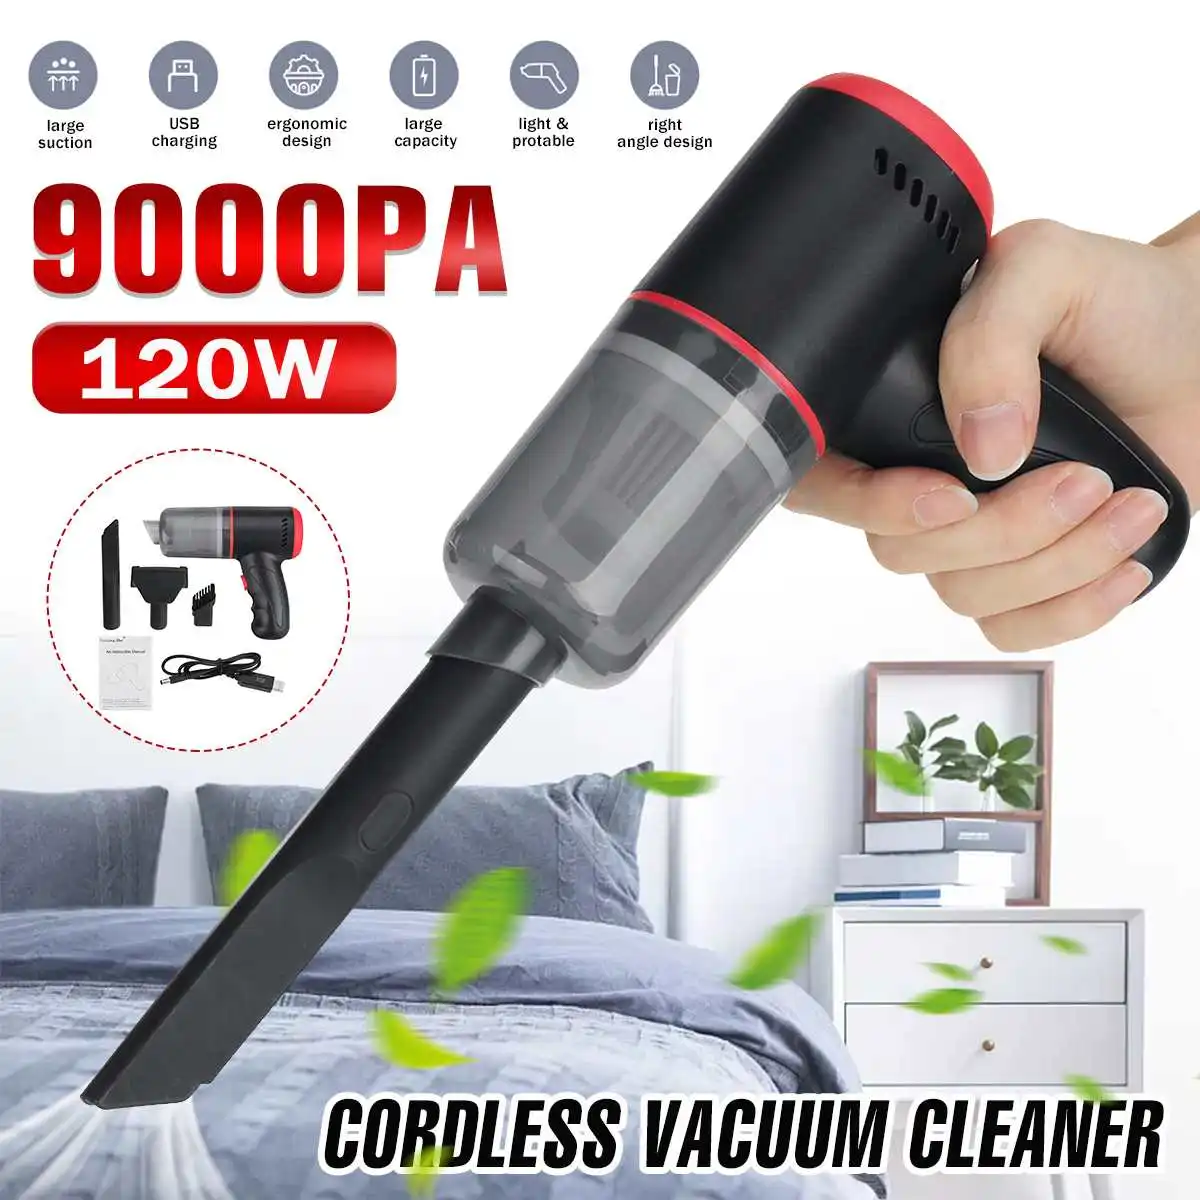 

9000Pa 120W Wireless Car Vacuum Cleaner Home Car Dual-purpose Cordless Handheld Mini Auto Vacuum Cleaner With Built-in Battery